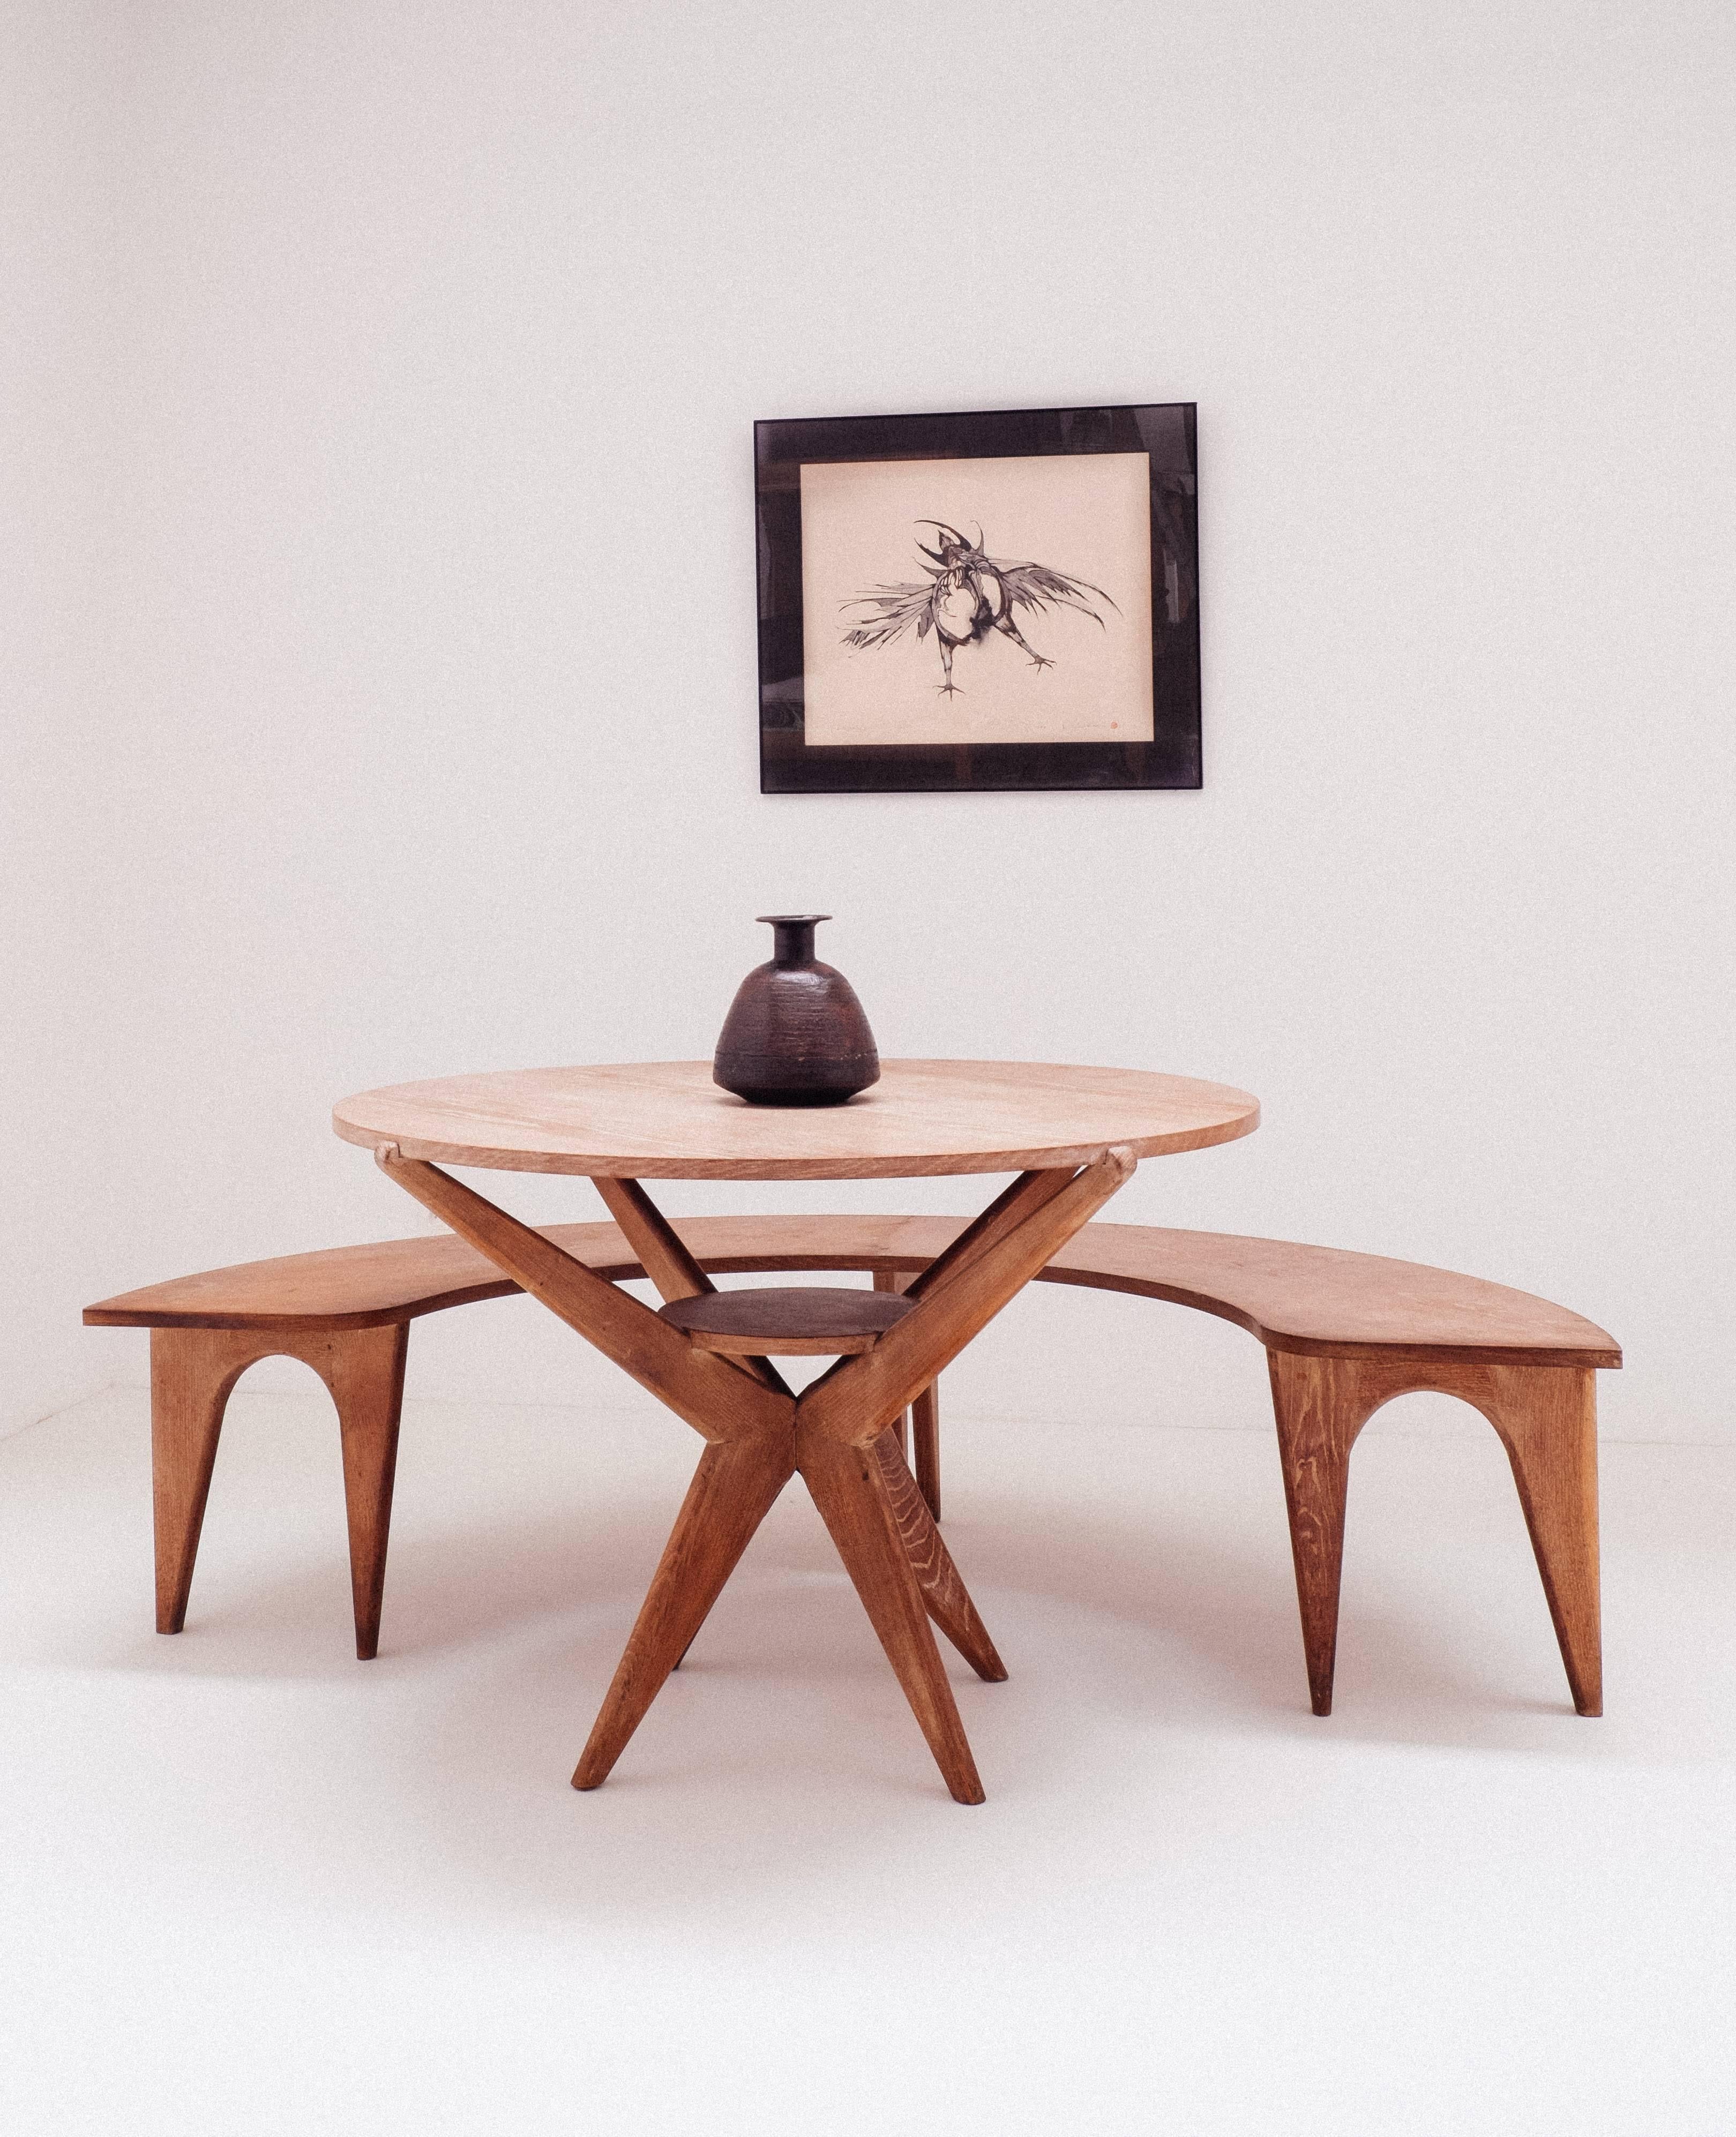 A truly exceptional nice table designed by and architect for his proper family home. Designed and executed as a on off piece in the early 1950s.
It's a veneered table with solid oak legs.